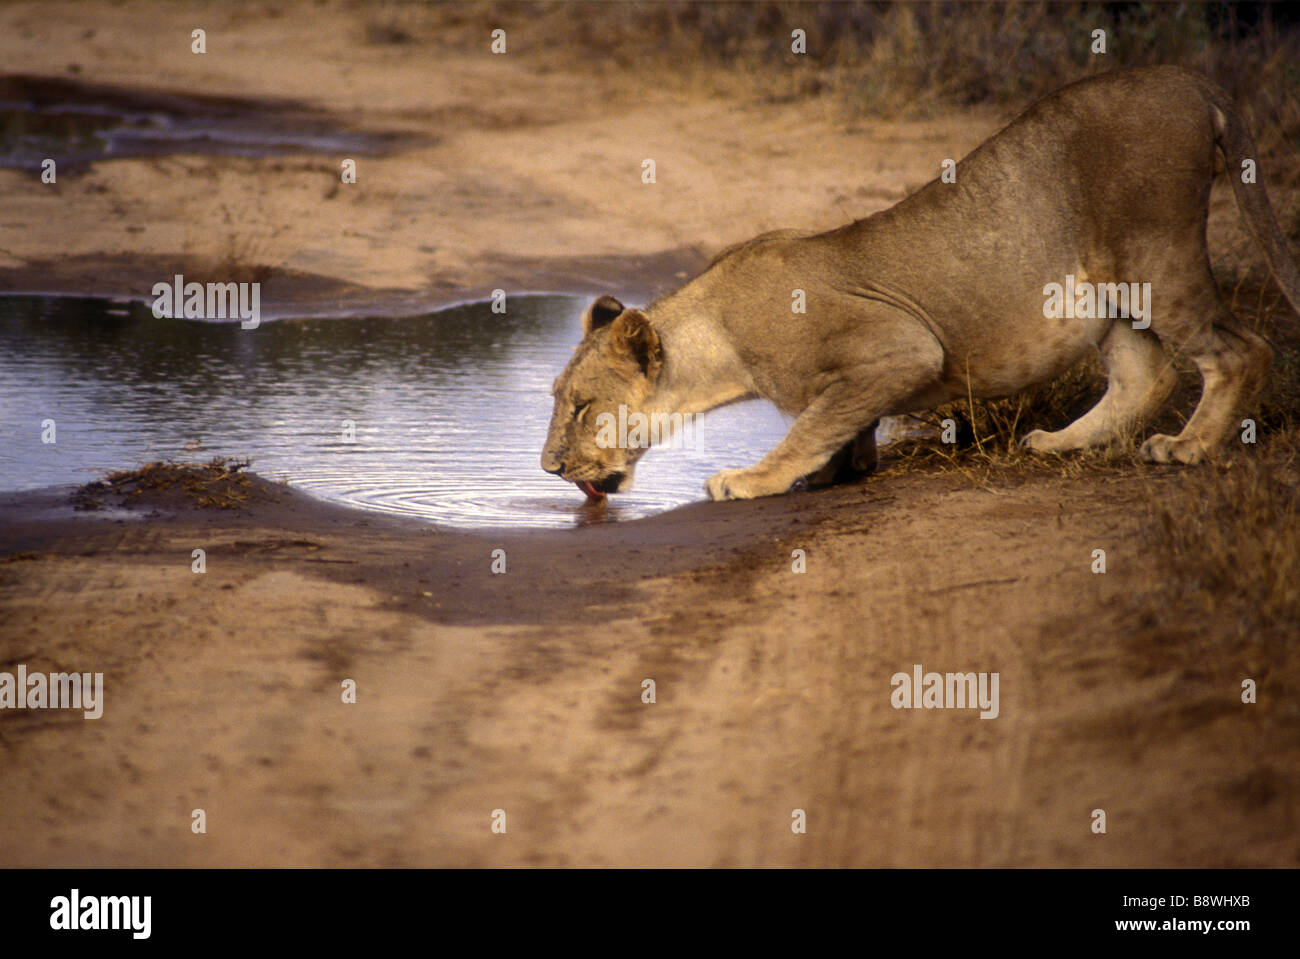 Lioness drinking from a pool in Samburu National Reserve Kenya East Africa Stock Photo